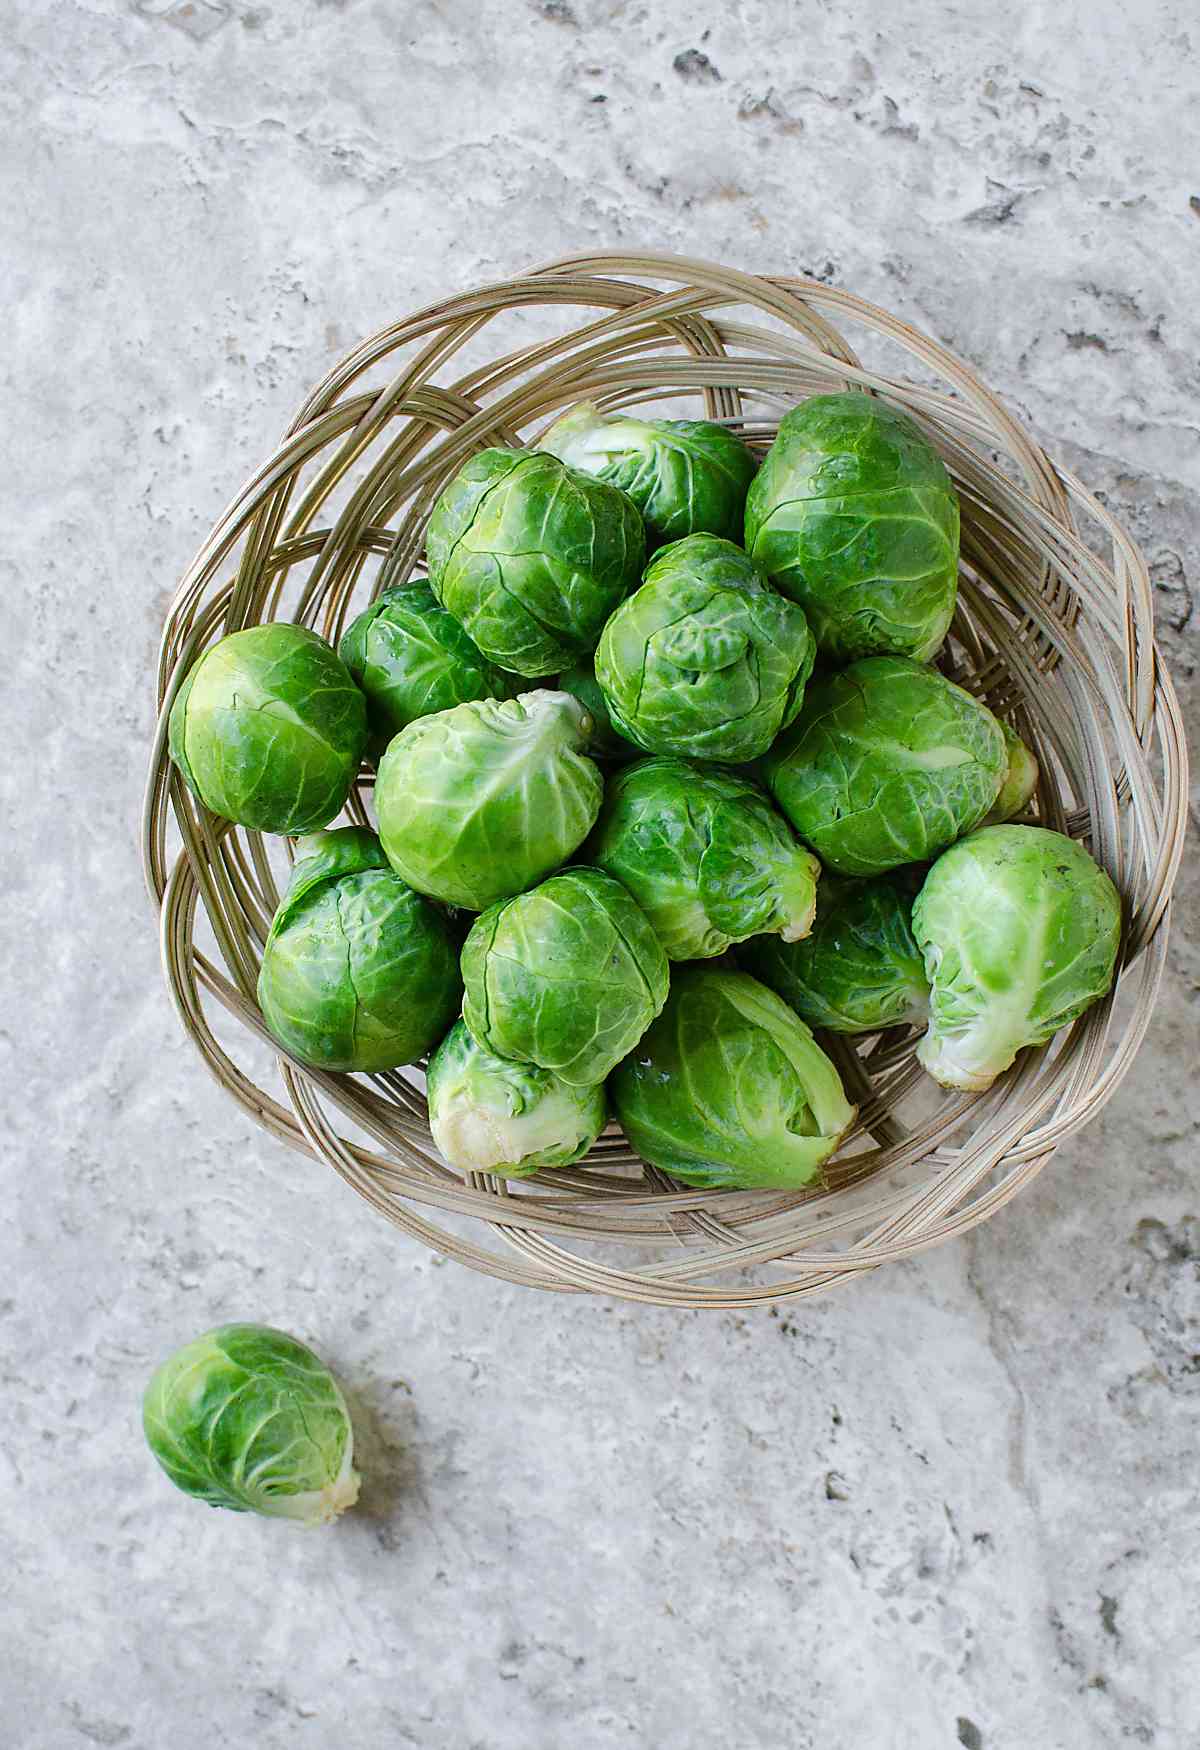 Fresh raw whole brussels sprouts in a basket.